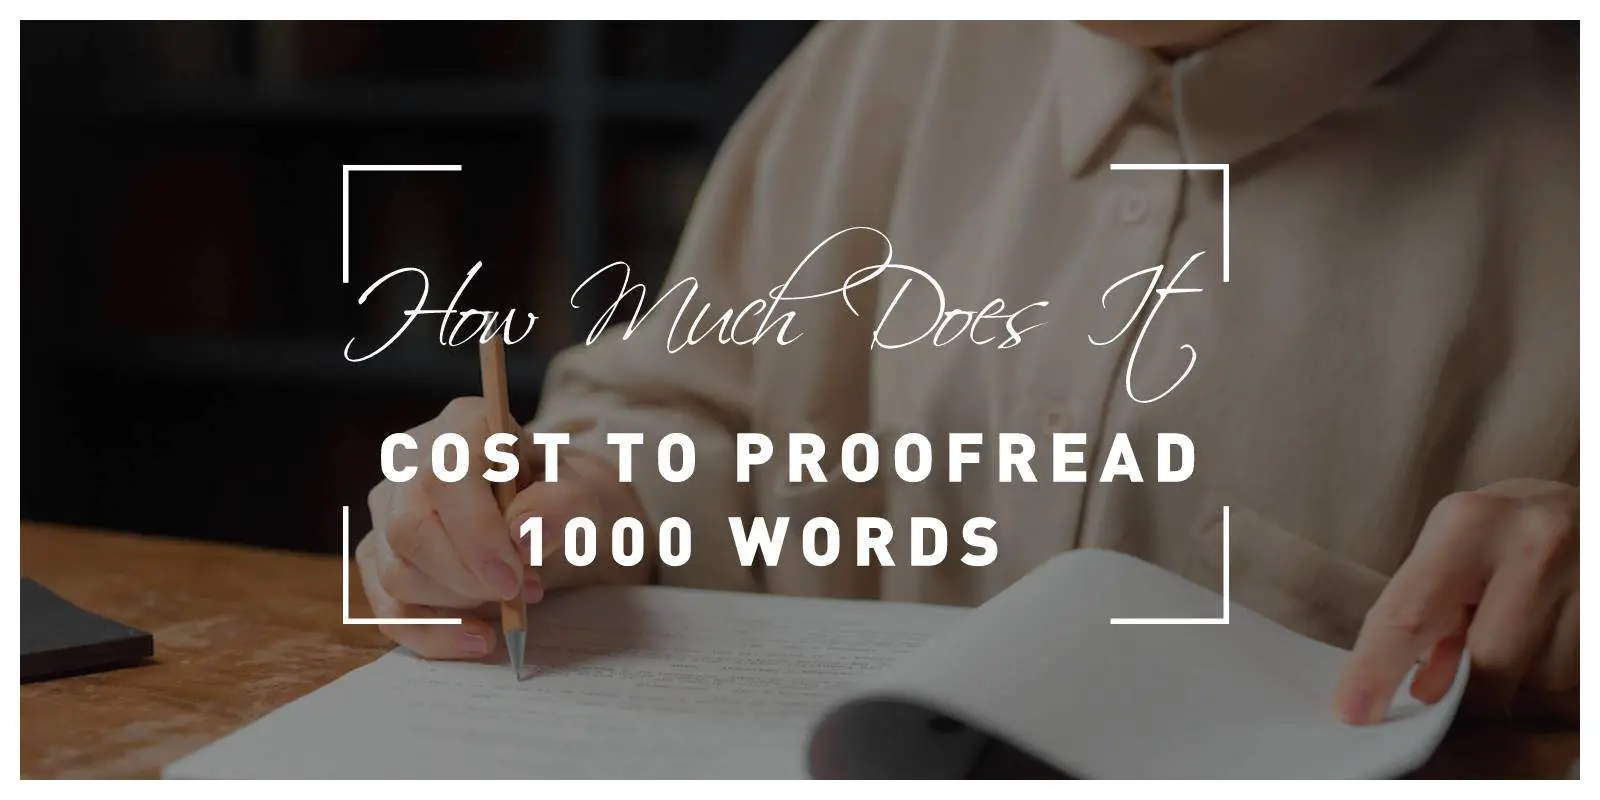 How Much Does It Cost to Proofread 1000 Words